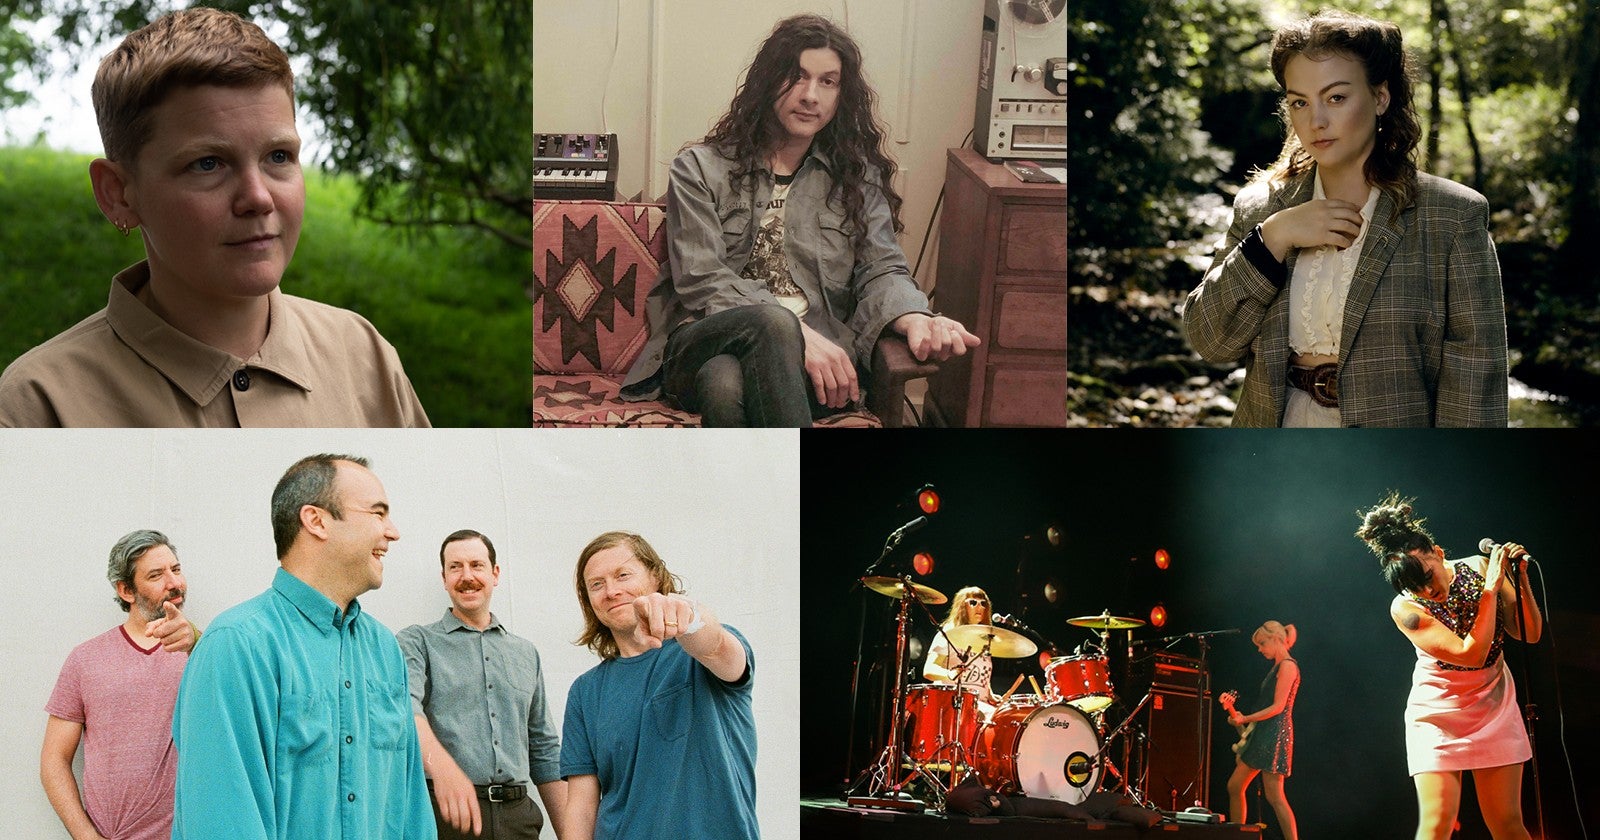 Catch Angel Olsen, Kae Tempest, Kurt Vile And More At The Sydney Opera House This Year